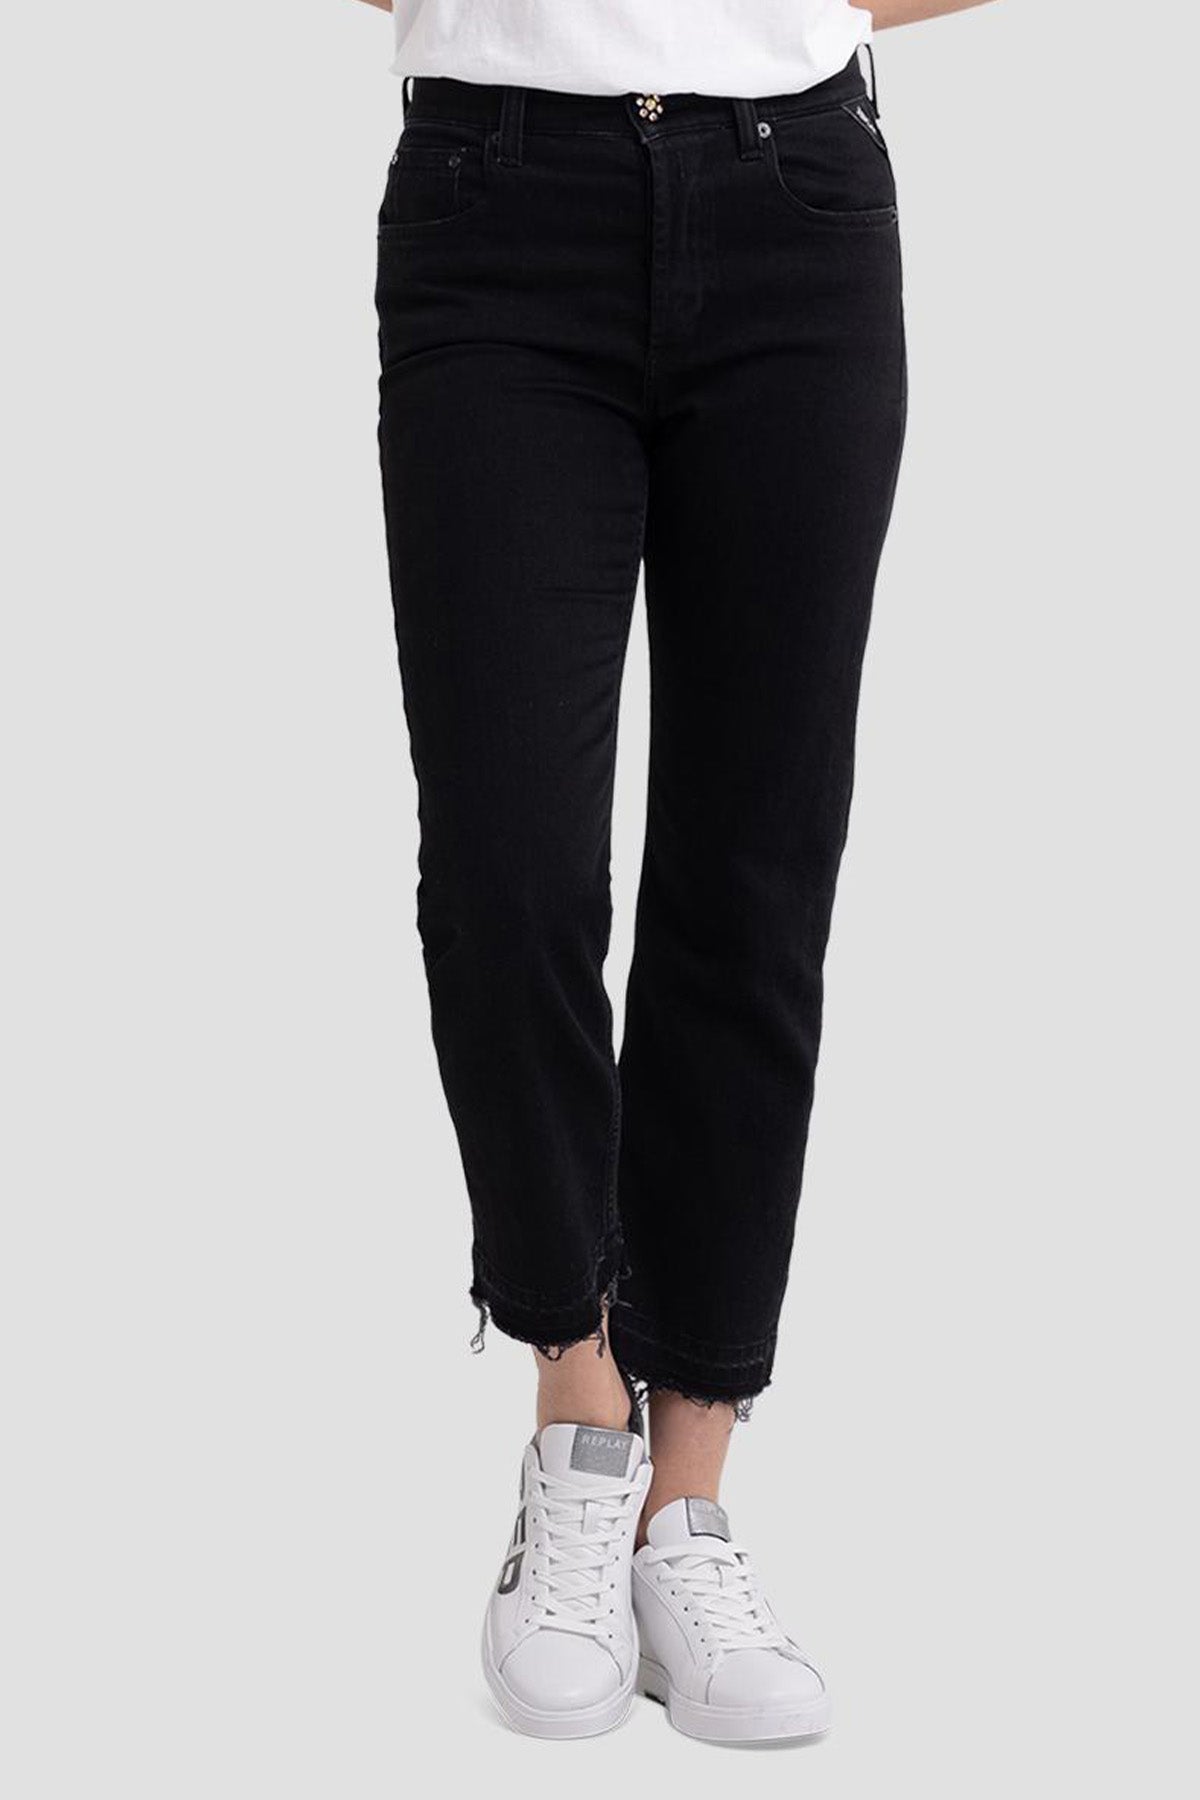 Replay Majike Cropped Straight Fit Jeans-Libas Trendy Fashion Store